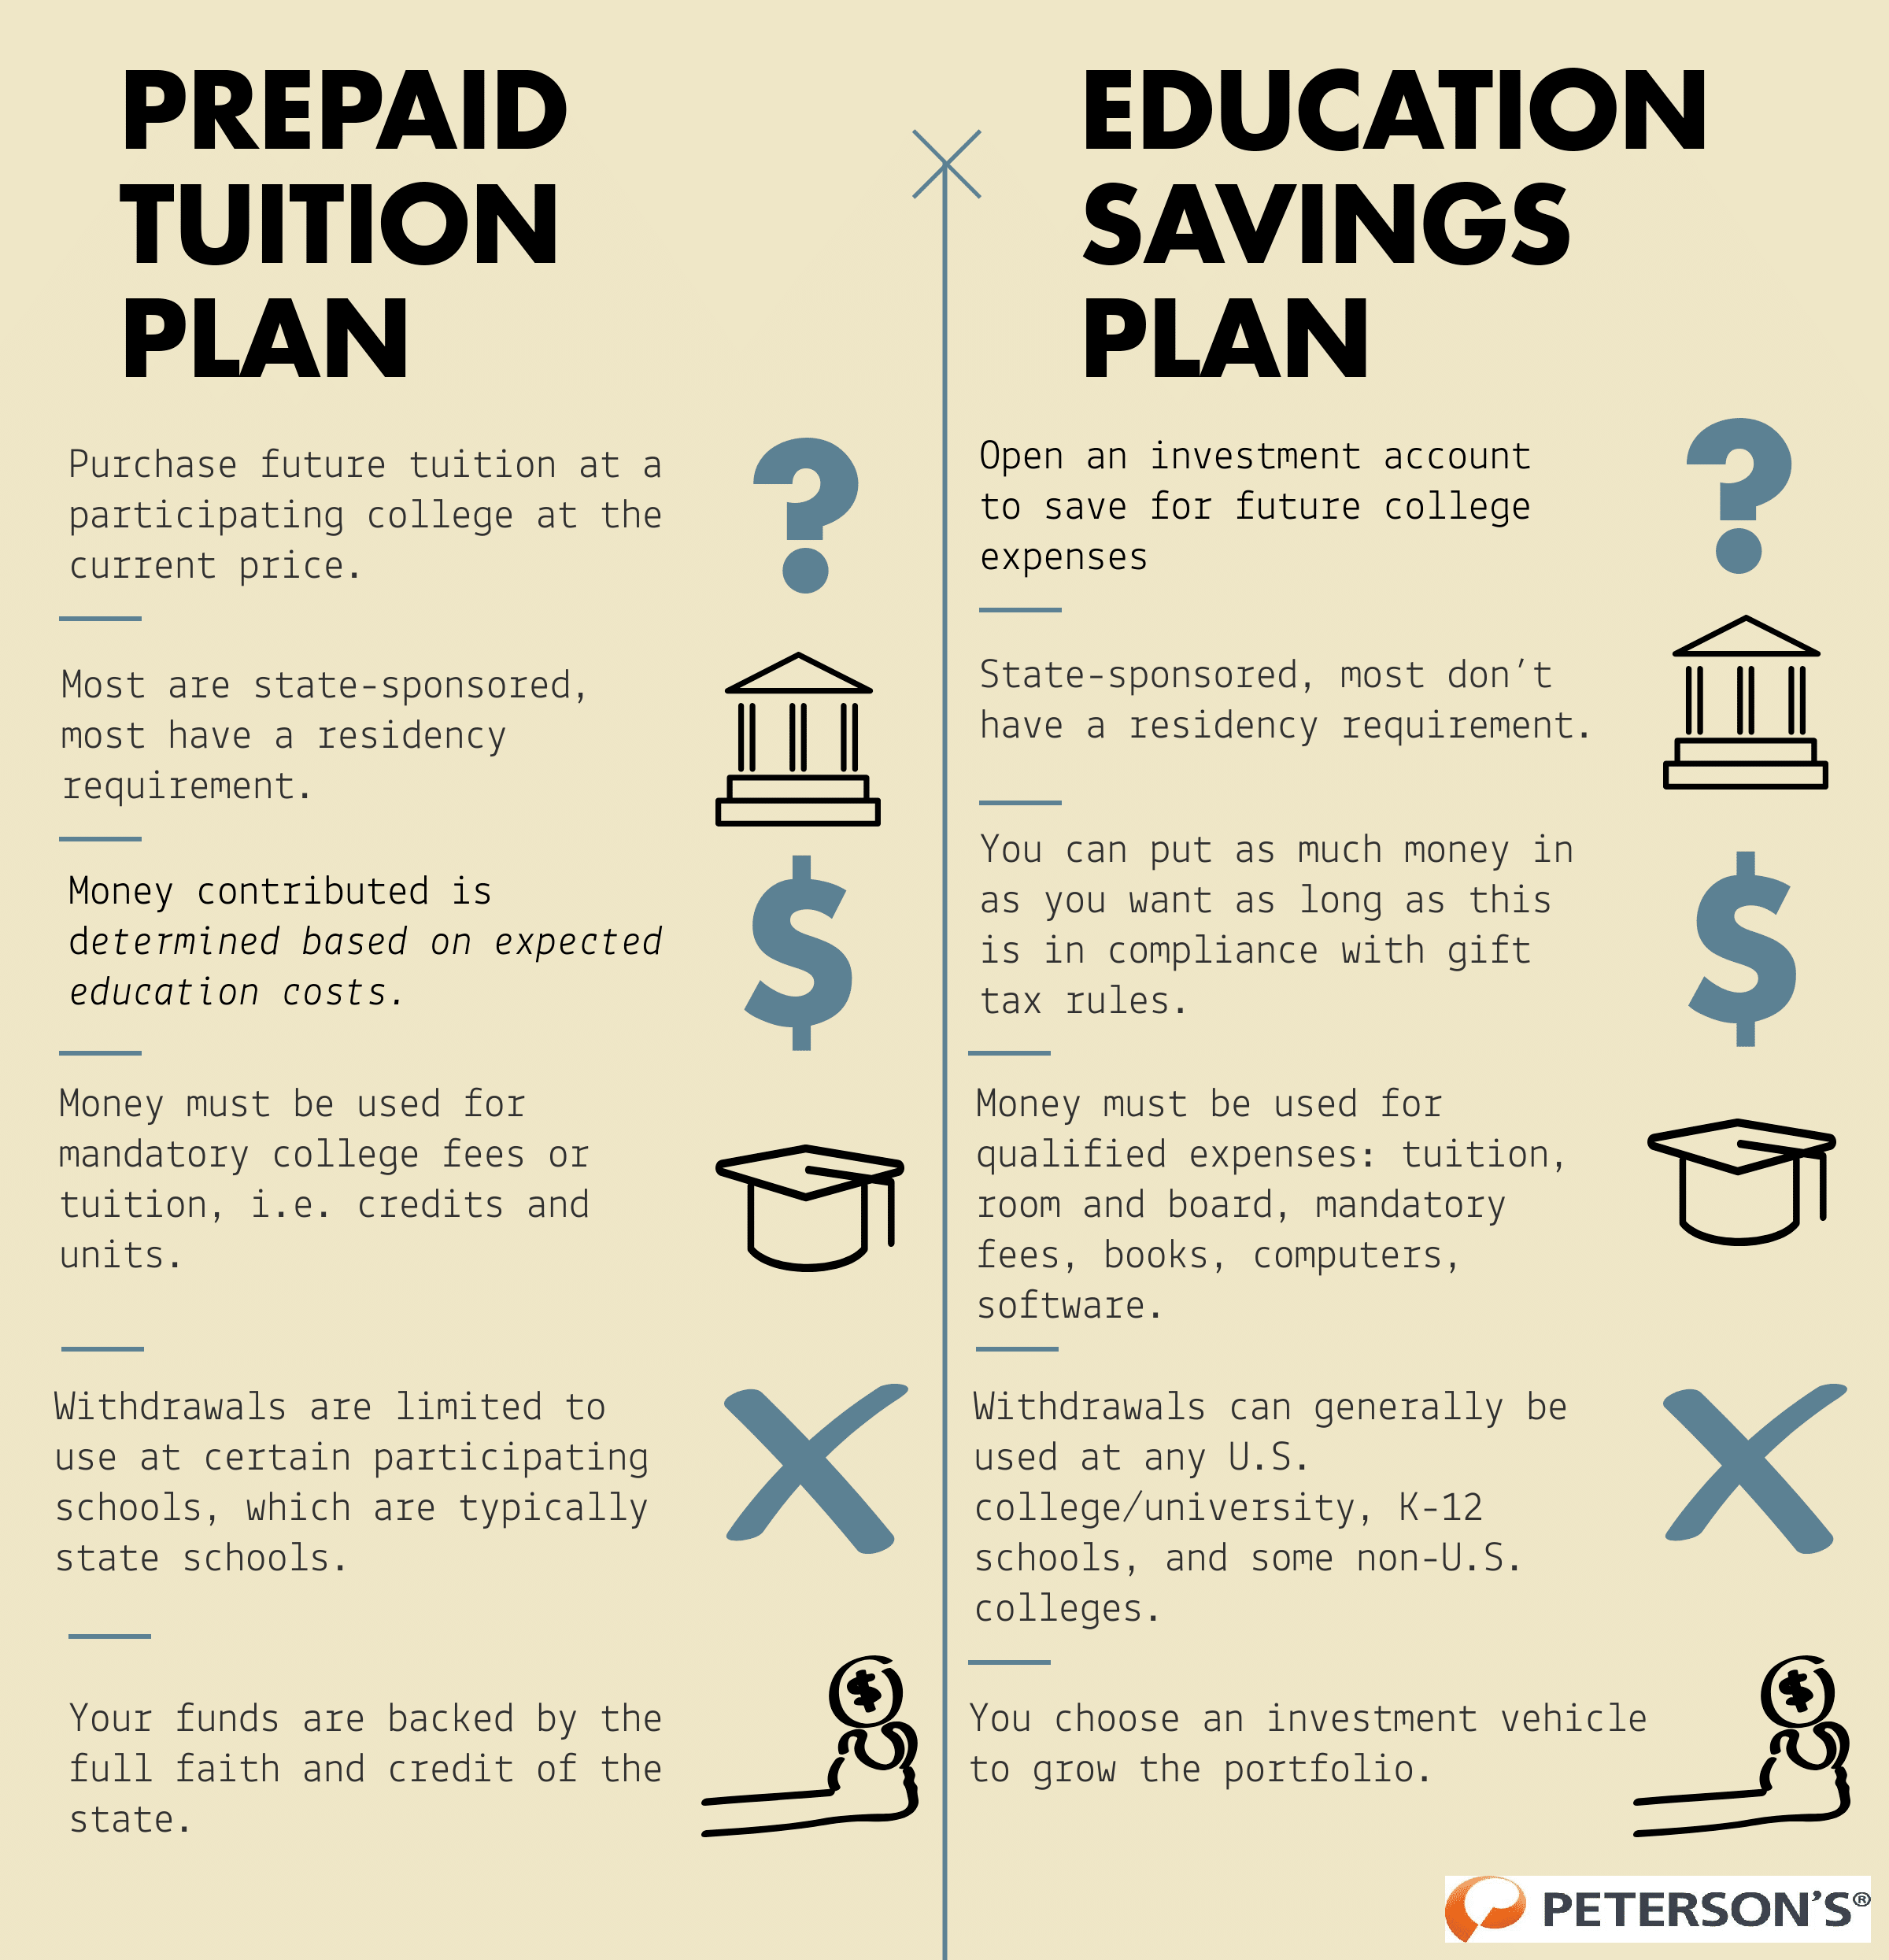 529 Plans fall under two categories: prepaid tuition plans and education savings plans. This graphic differentiates the two.